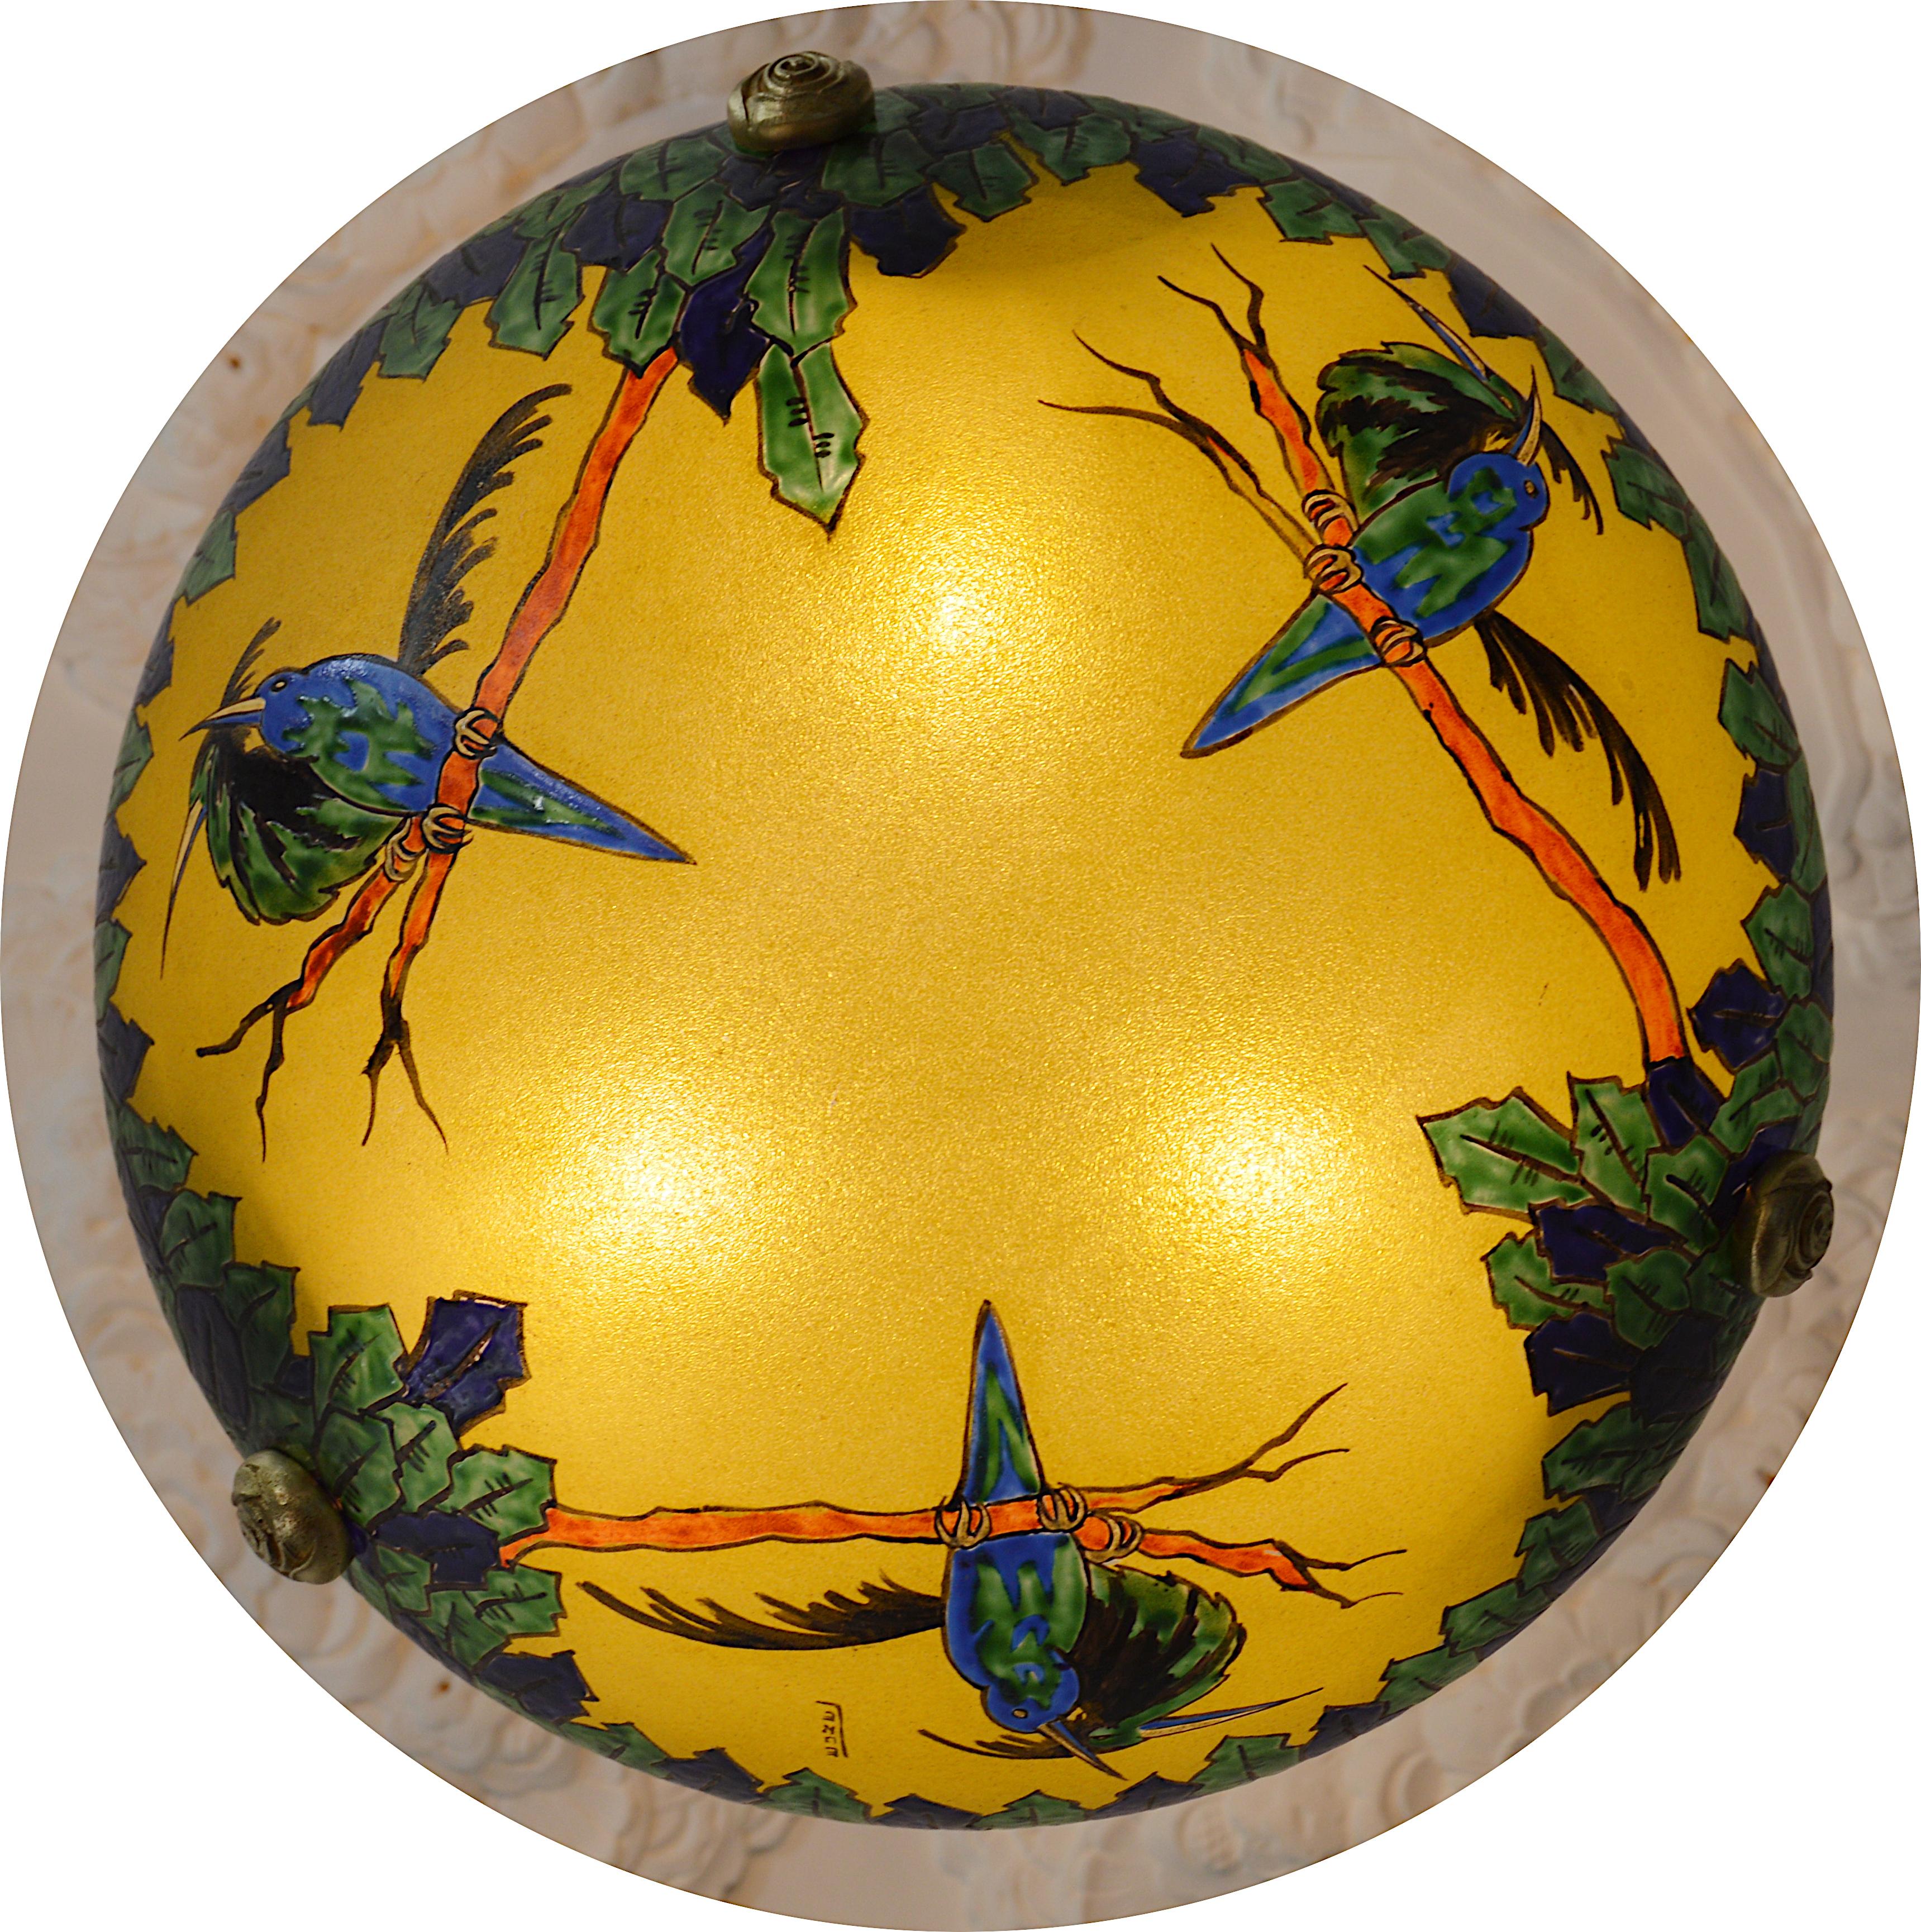 Any fair offer will be examined with the utmost attention, please send a message. French Art Deco enameled pendant chandelier by Leune, 28bis rue du Cardinal Lemoine, Paris, France, 1920s. Deep granite glass shade with enameled pattern. Three birds